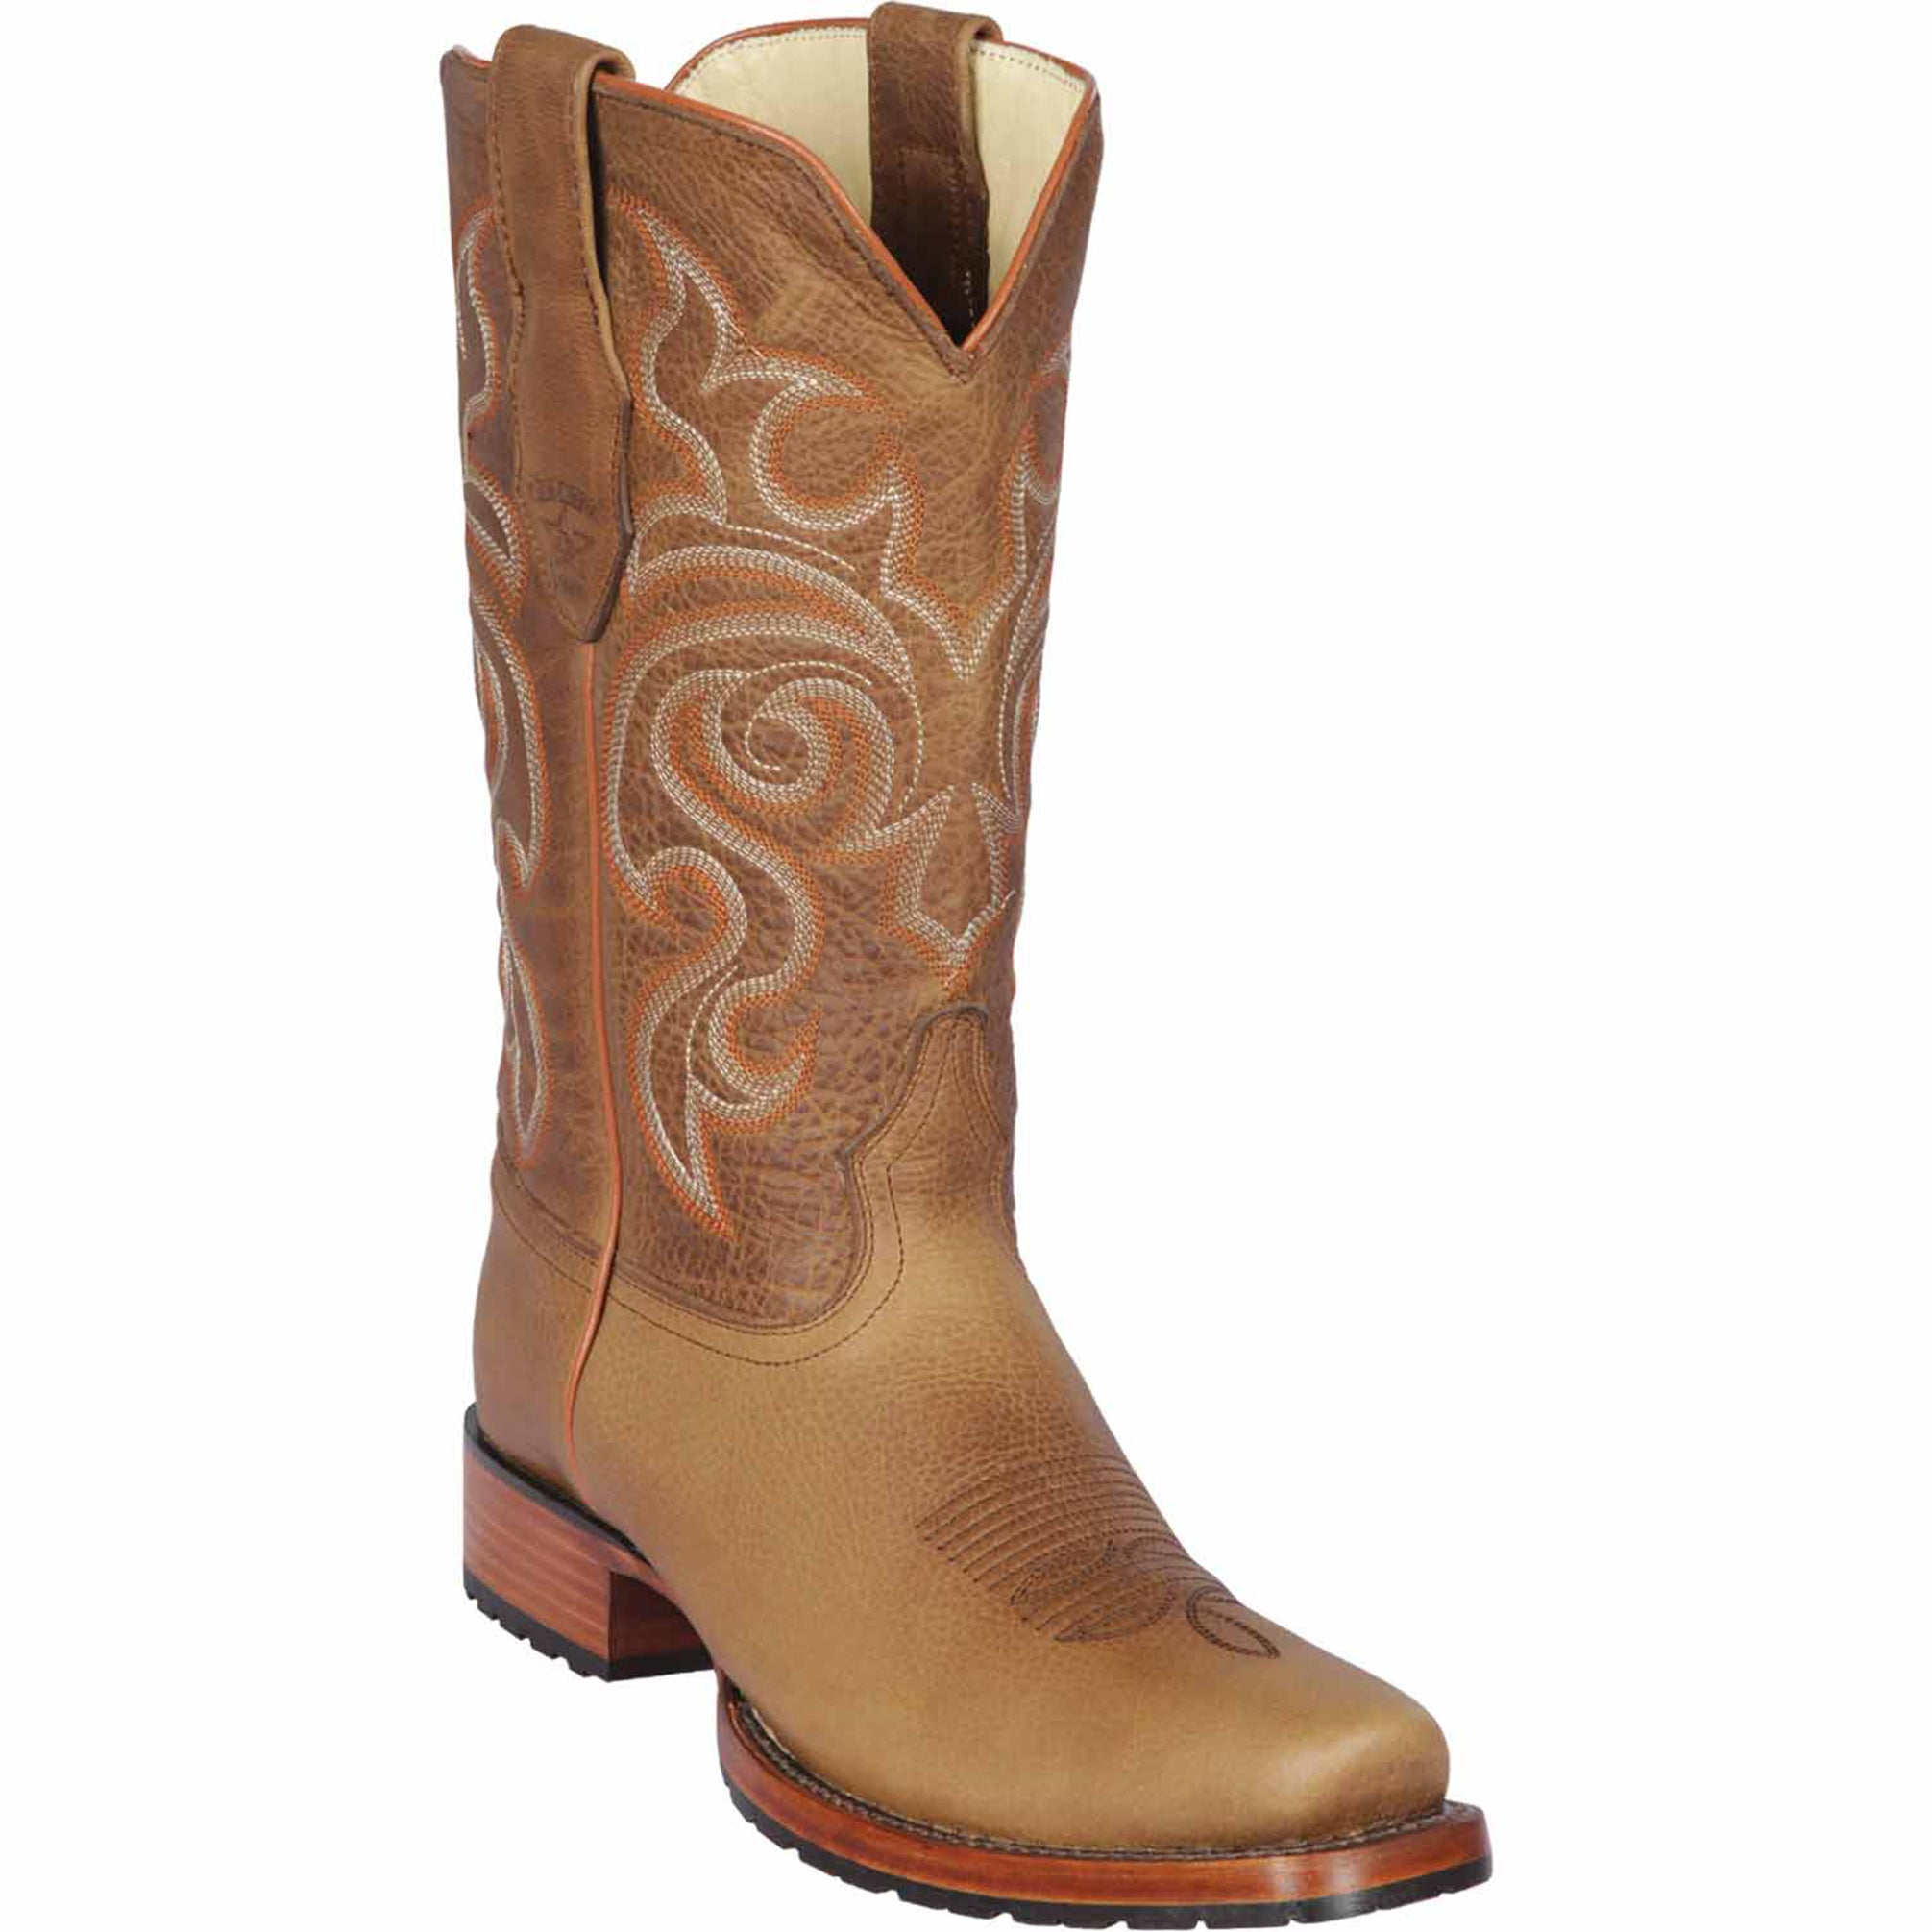 Quincy Ranchera Bronce Cowgirl Boots Square Toe